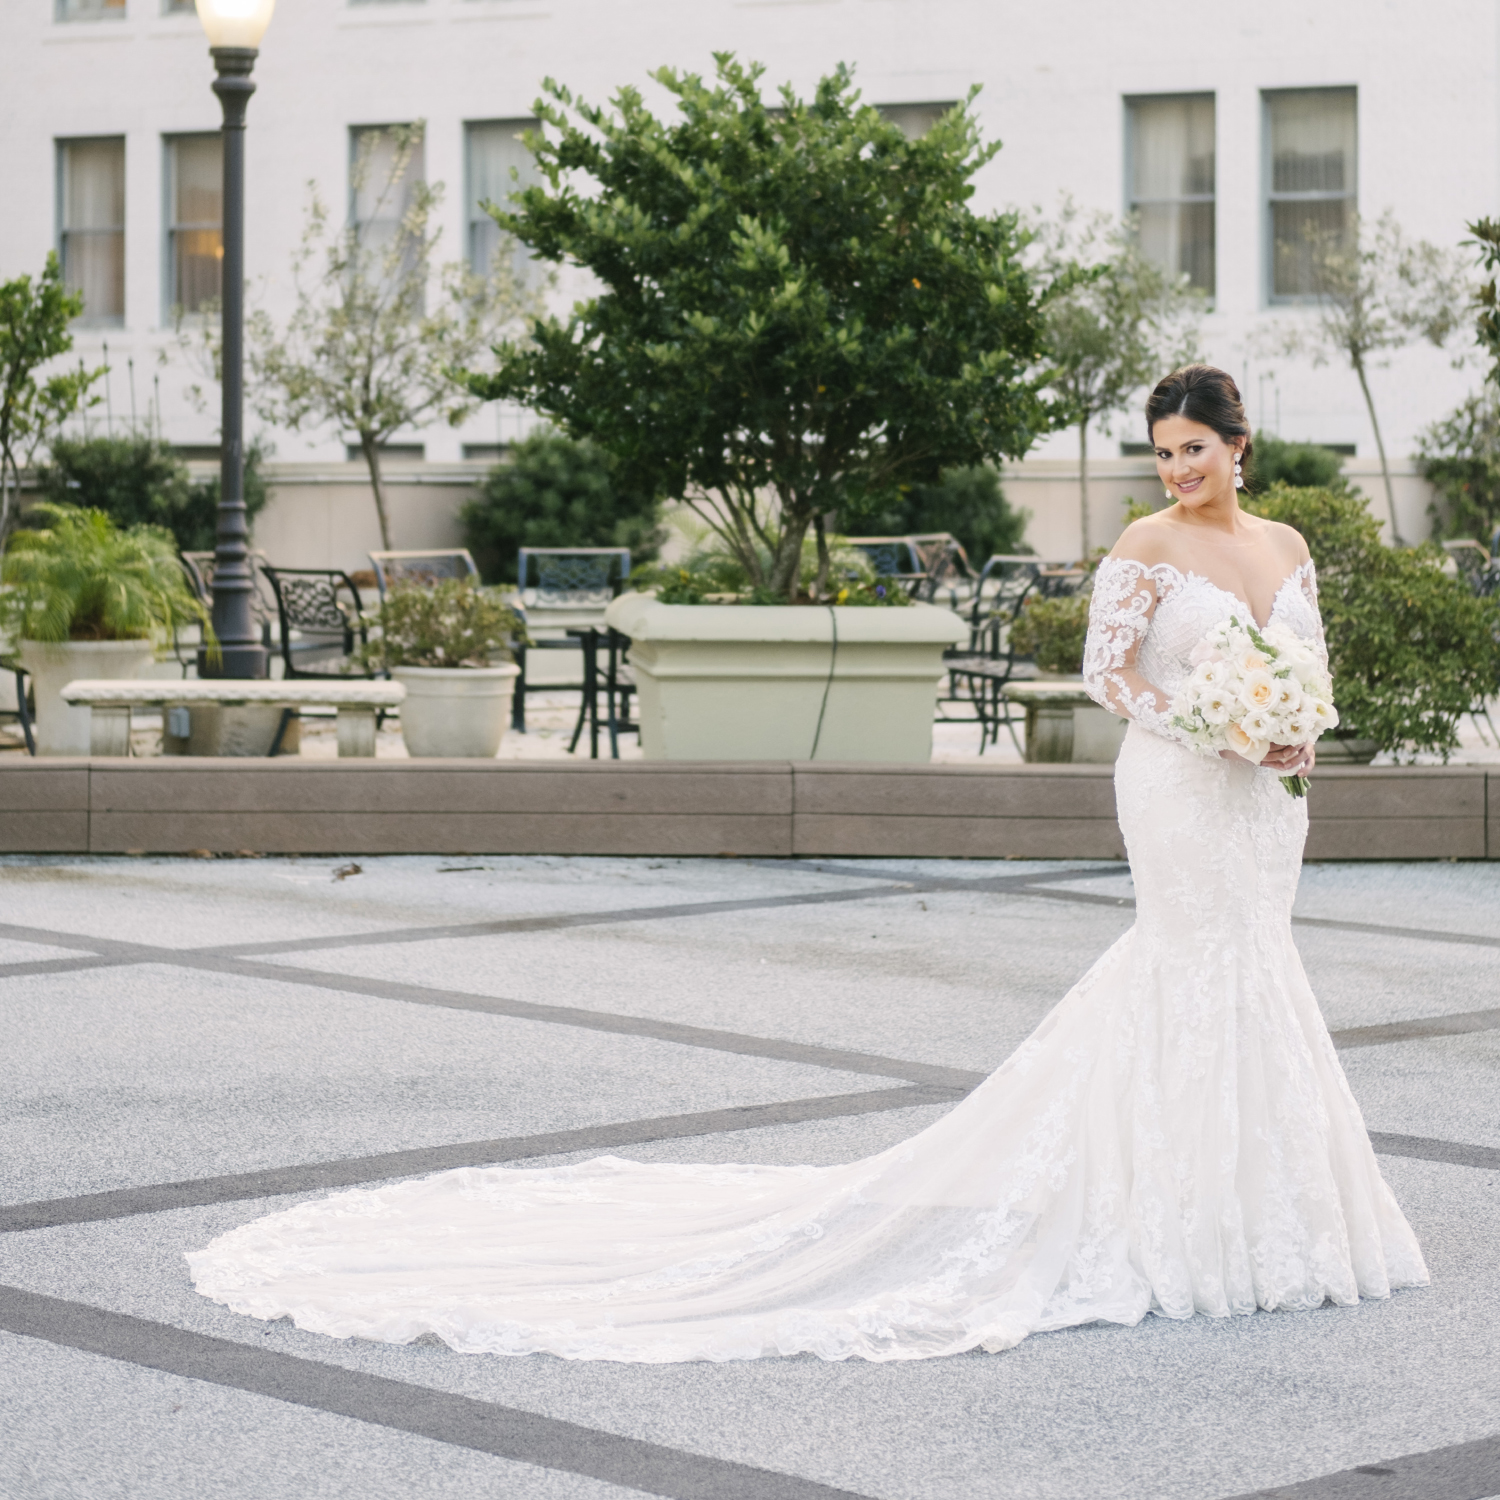 Immaculate Conception Pavilion of Two Sisters Wedding Photographs | Samantha & Stephen